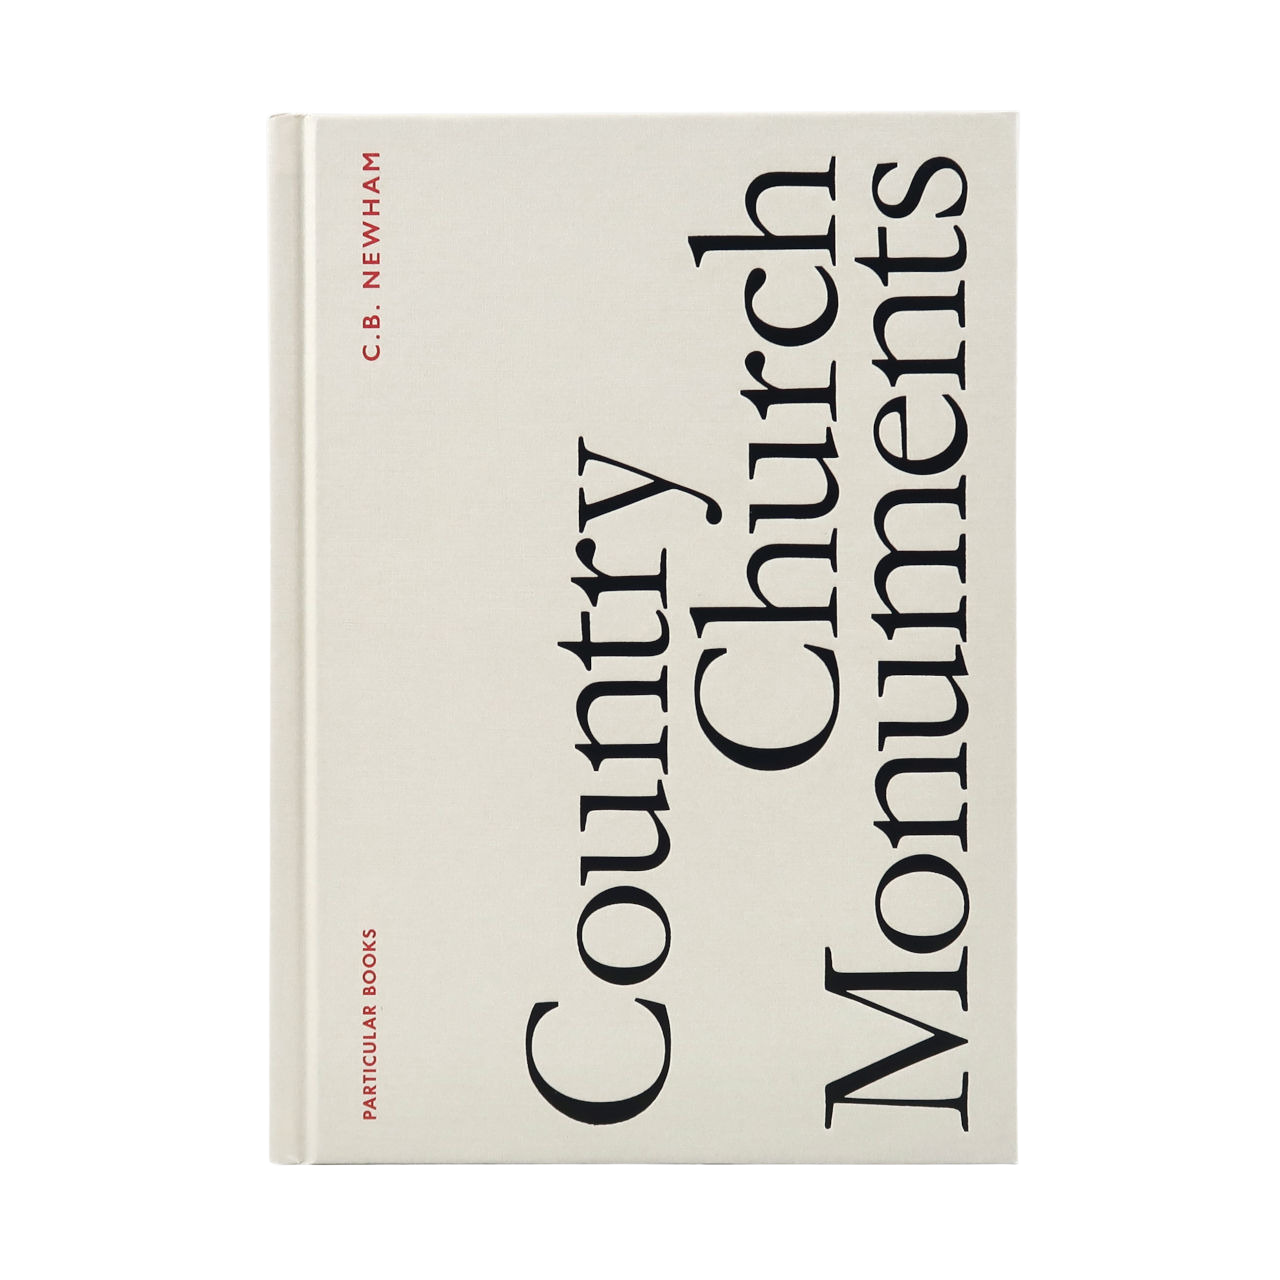 Particular Books Country Church Monuments Book by C B Newham